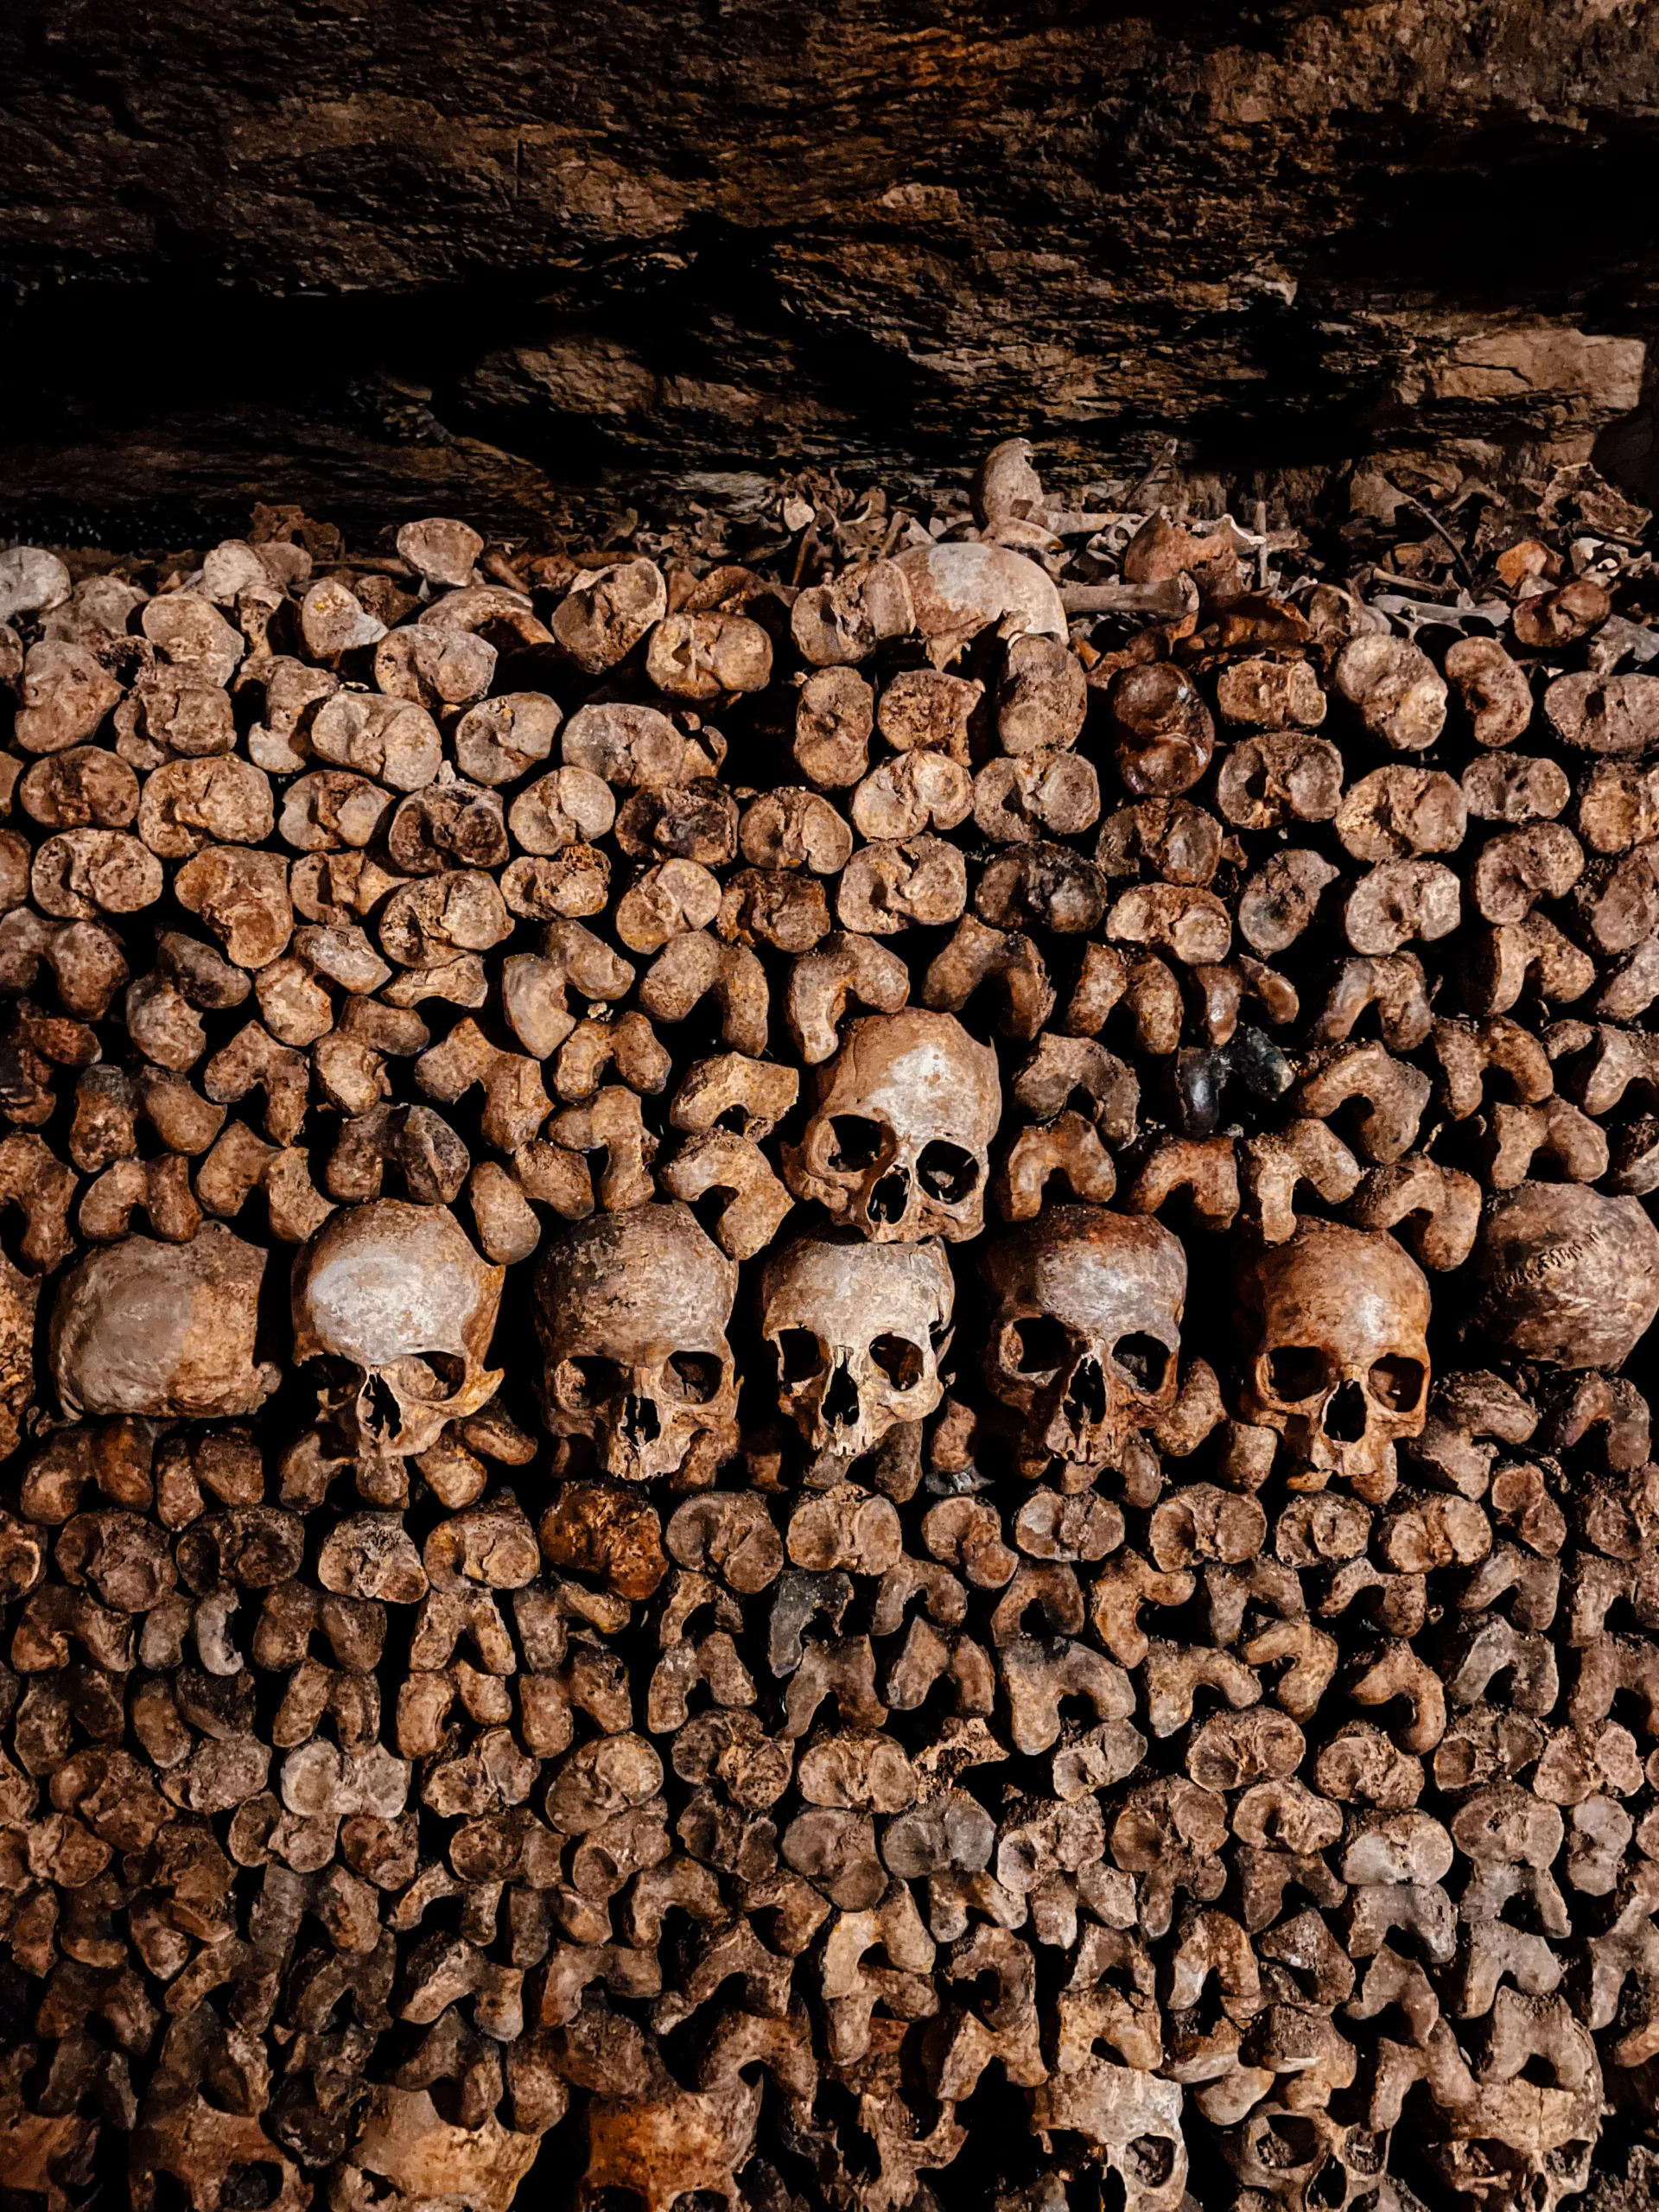 Inside of the catacombs of Paris - a series of skulls and bones sit staked on top of each other 